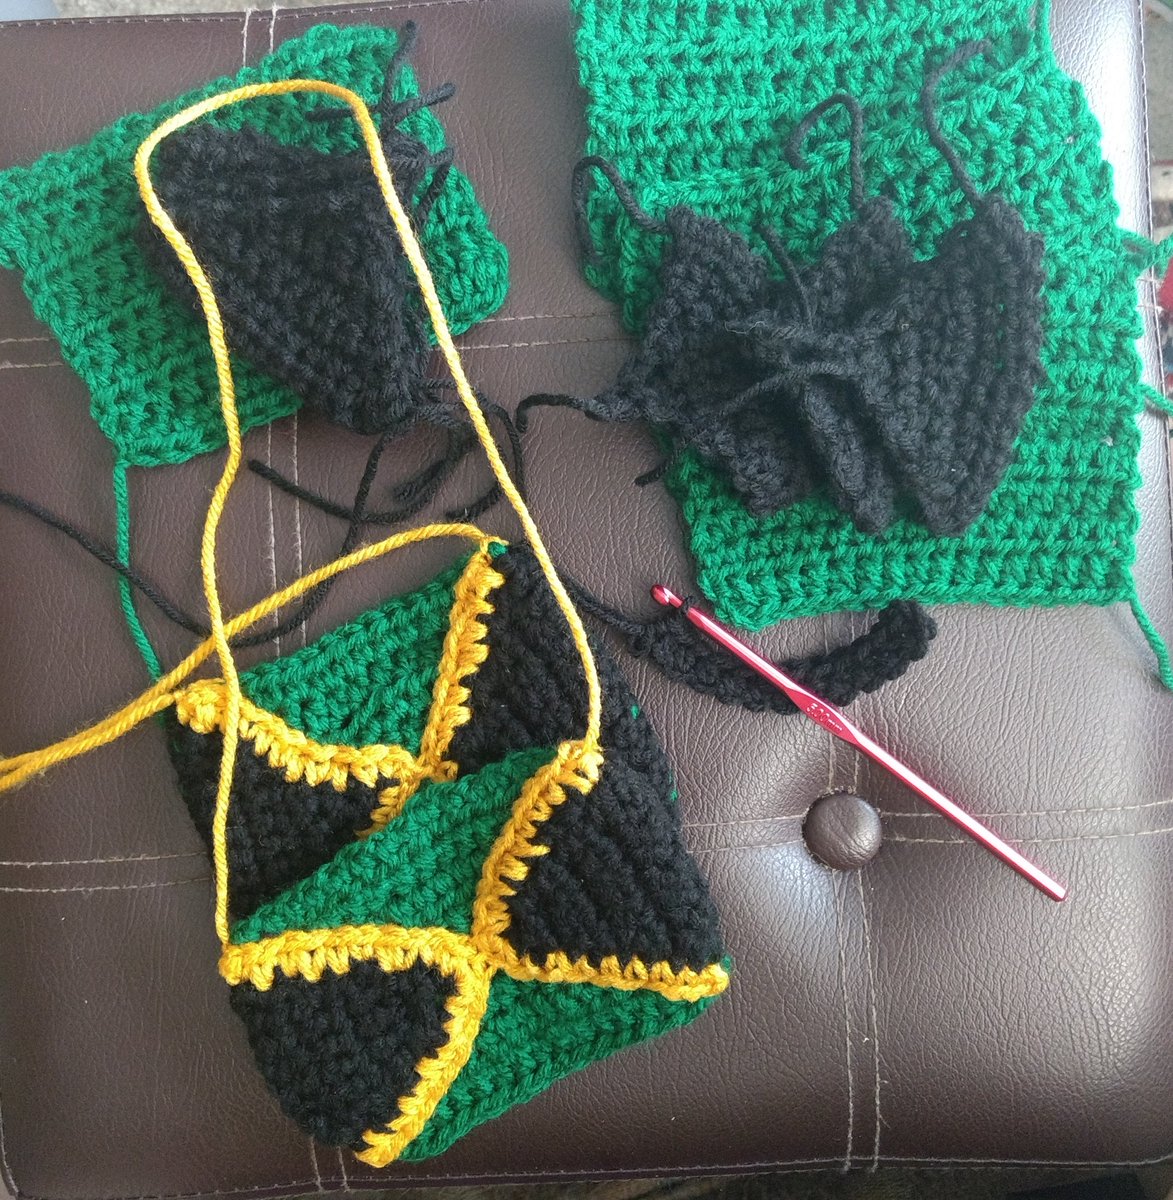 My afternoon project. 2 done 4 to go. #crochet #handmade #Jamaica #jamaicanflag